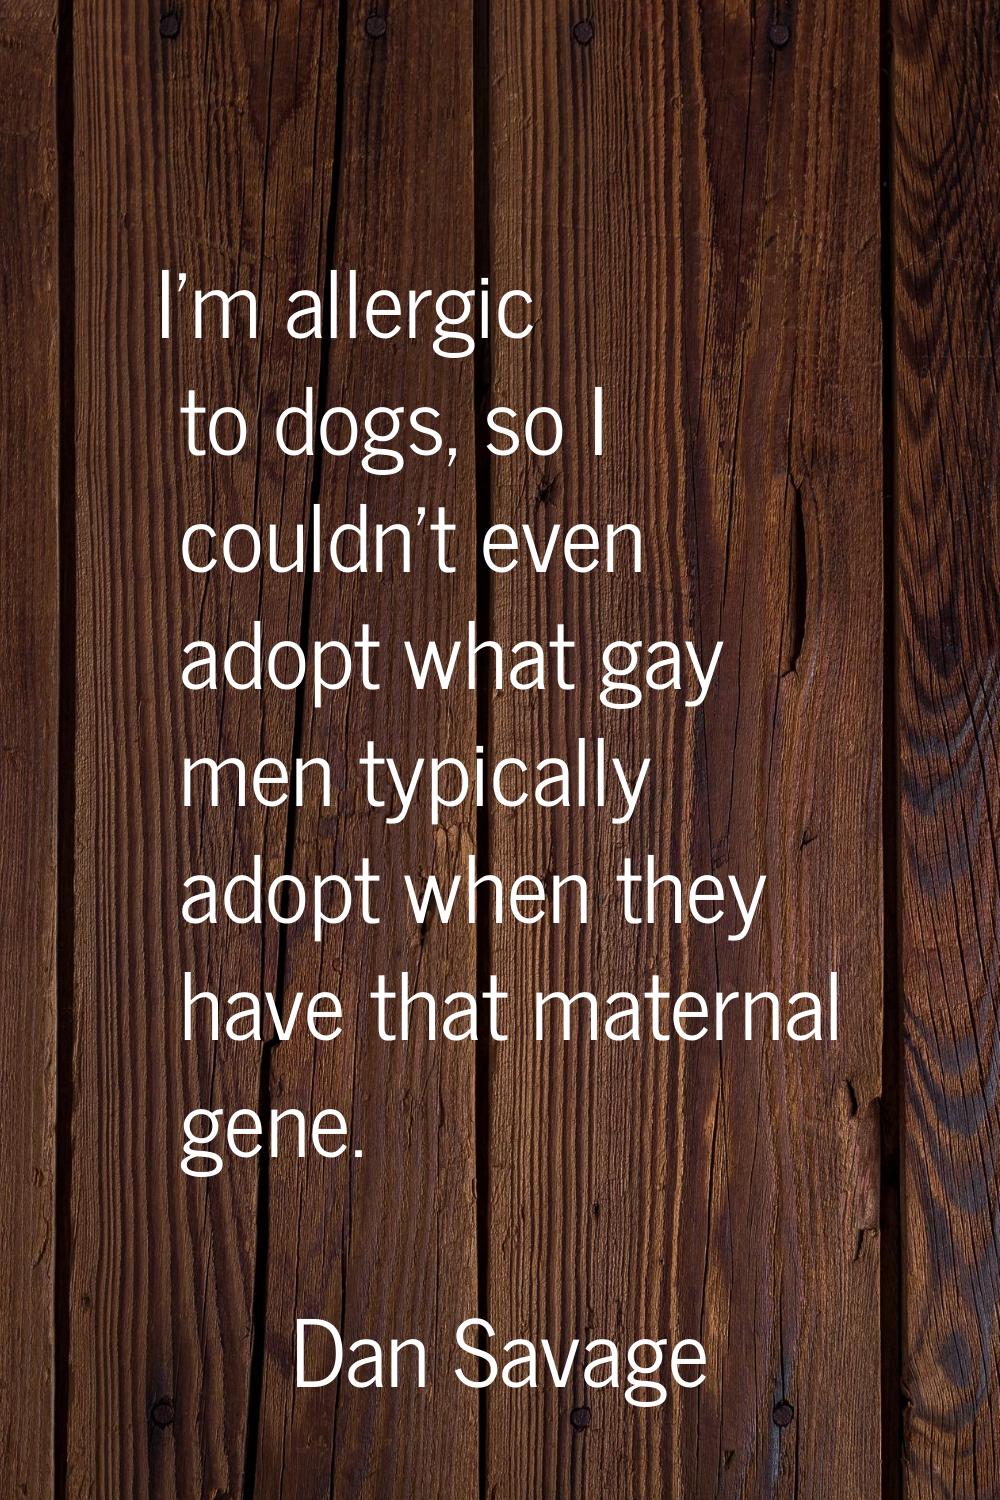 I'm allergic to dogs, so I couldn't even adopt what gay men typically adopt when they have that mat